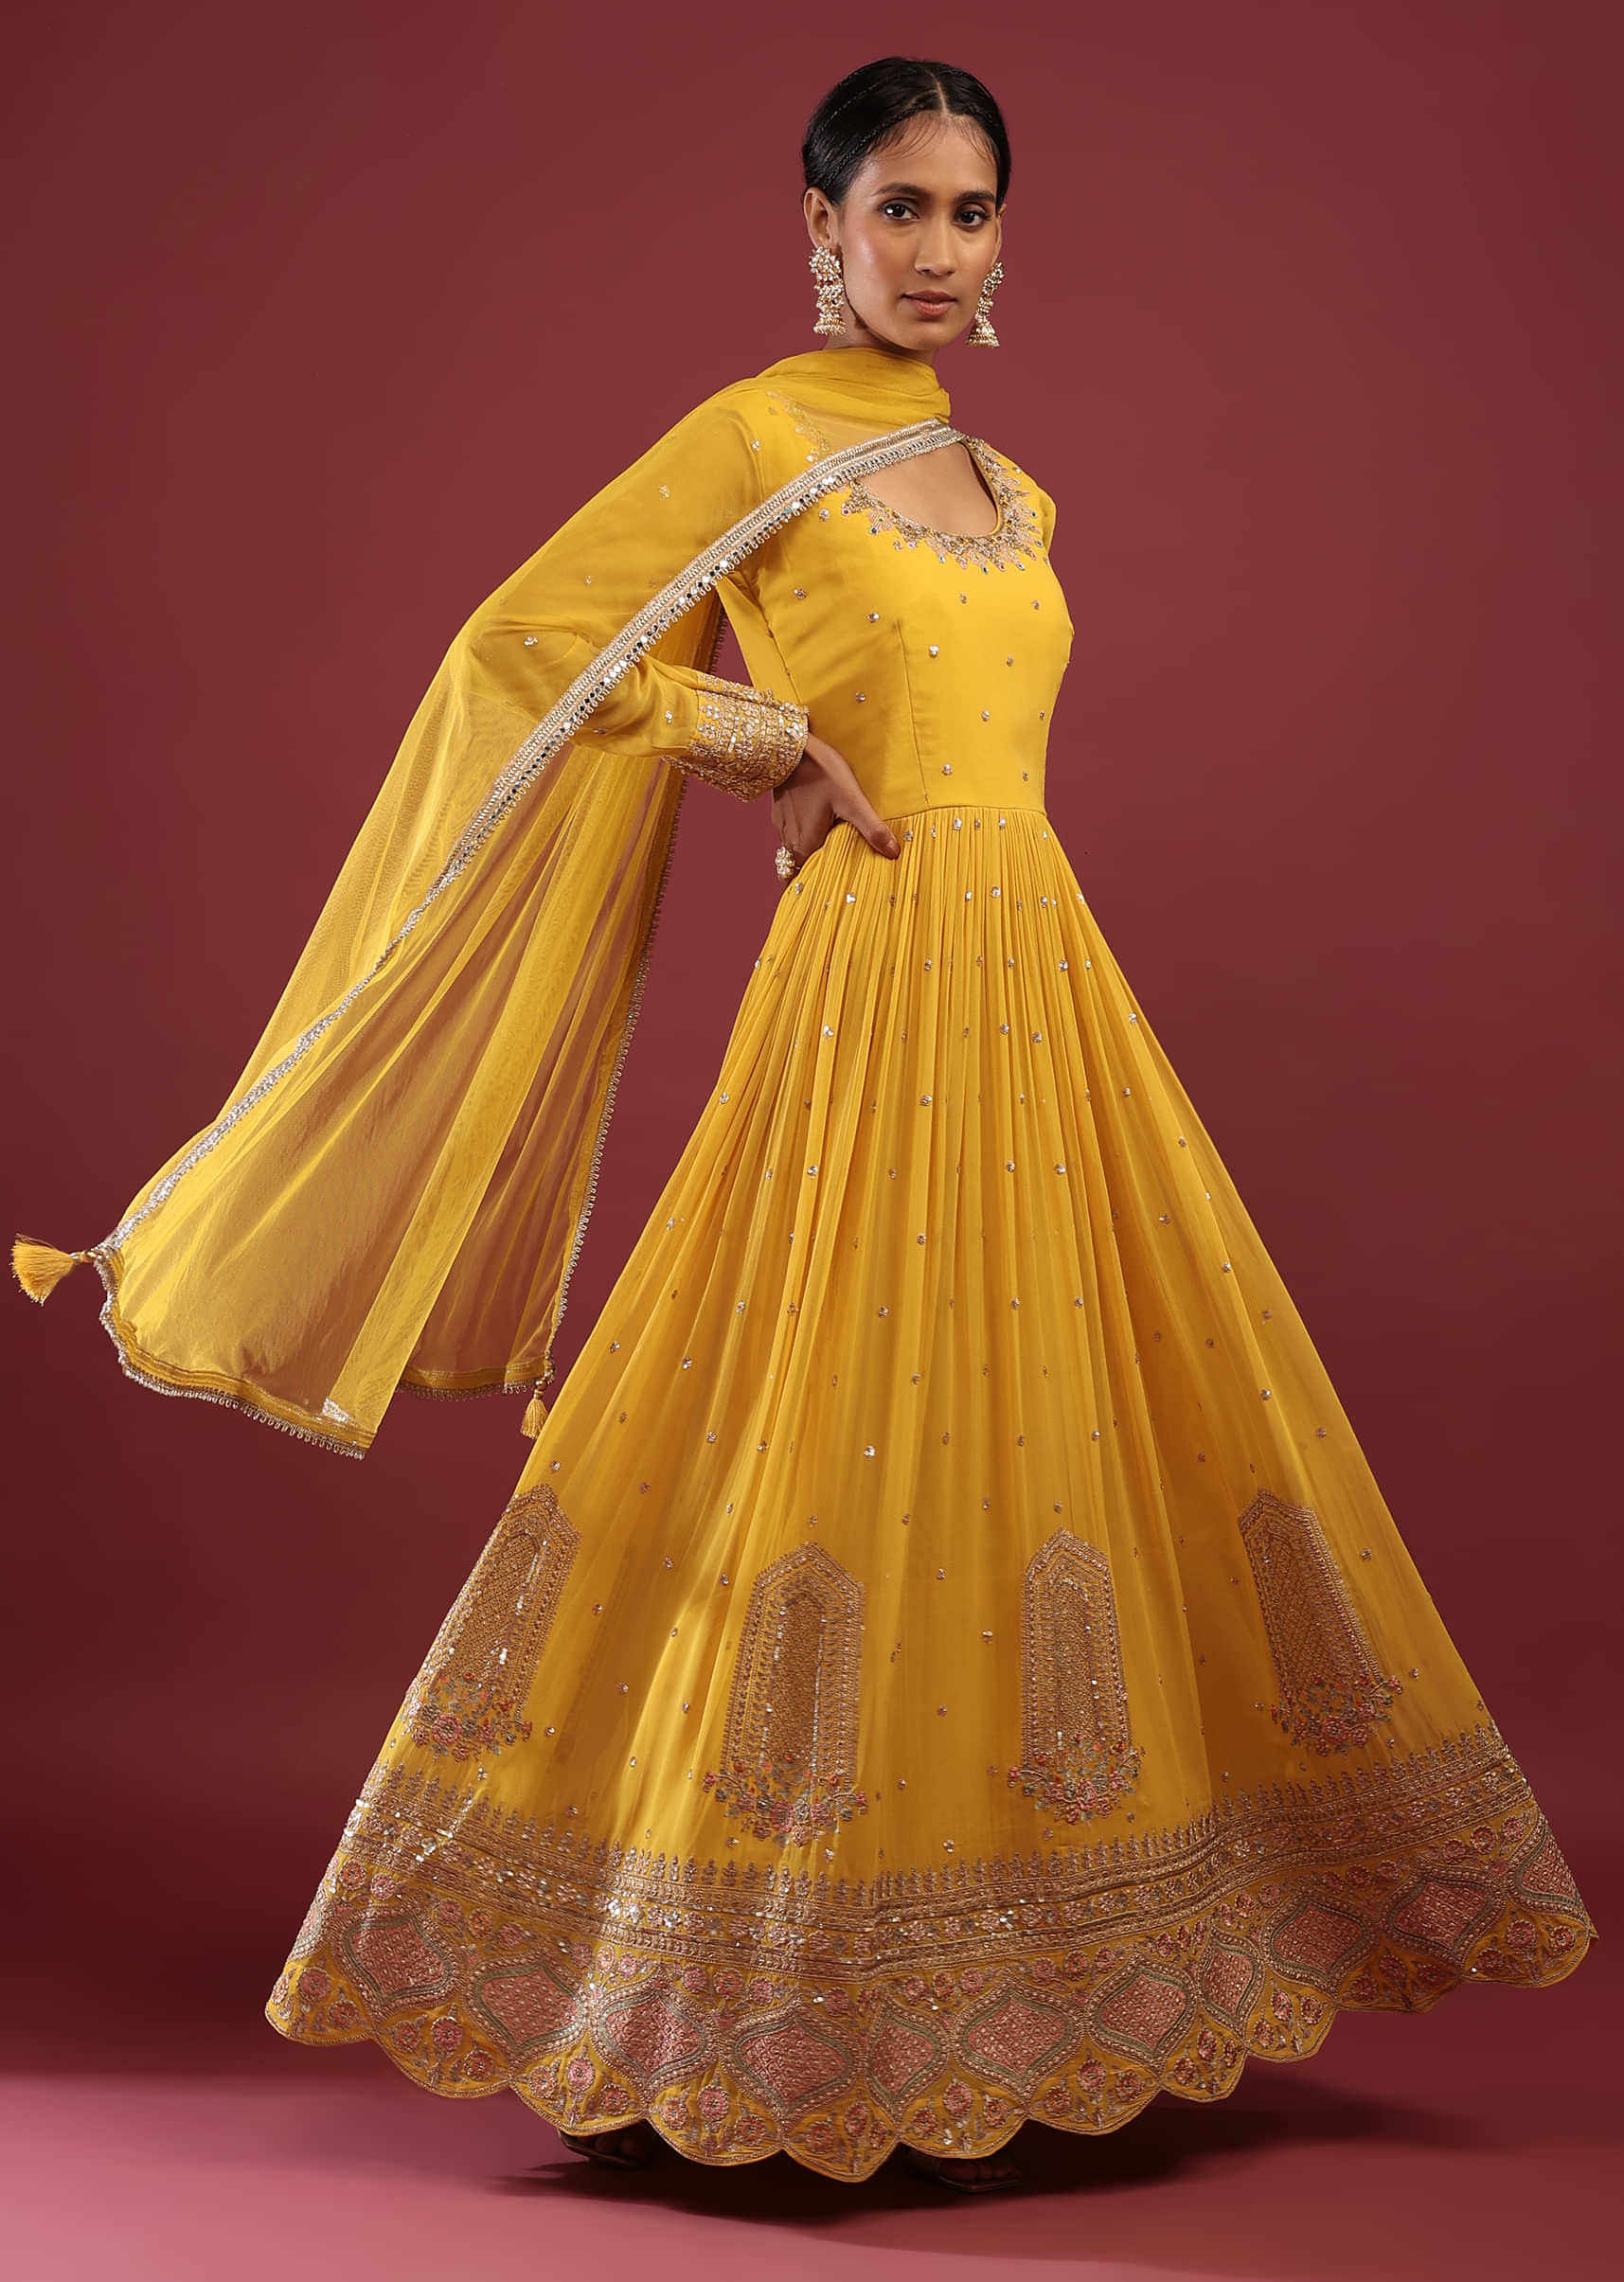 Chrome Yellow Anarkali Suit In Georgette With Multicolored Resham And Zari Embroidered Mughal Design